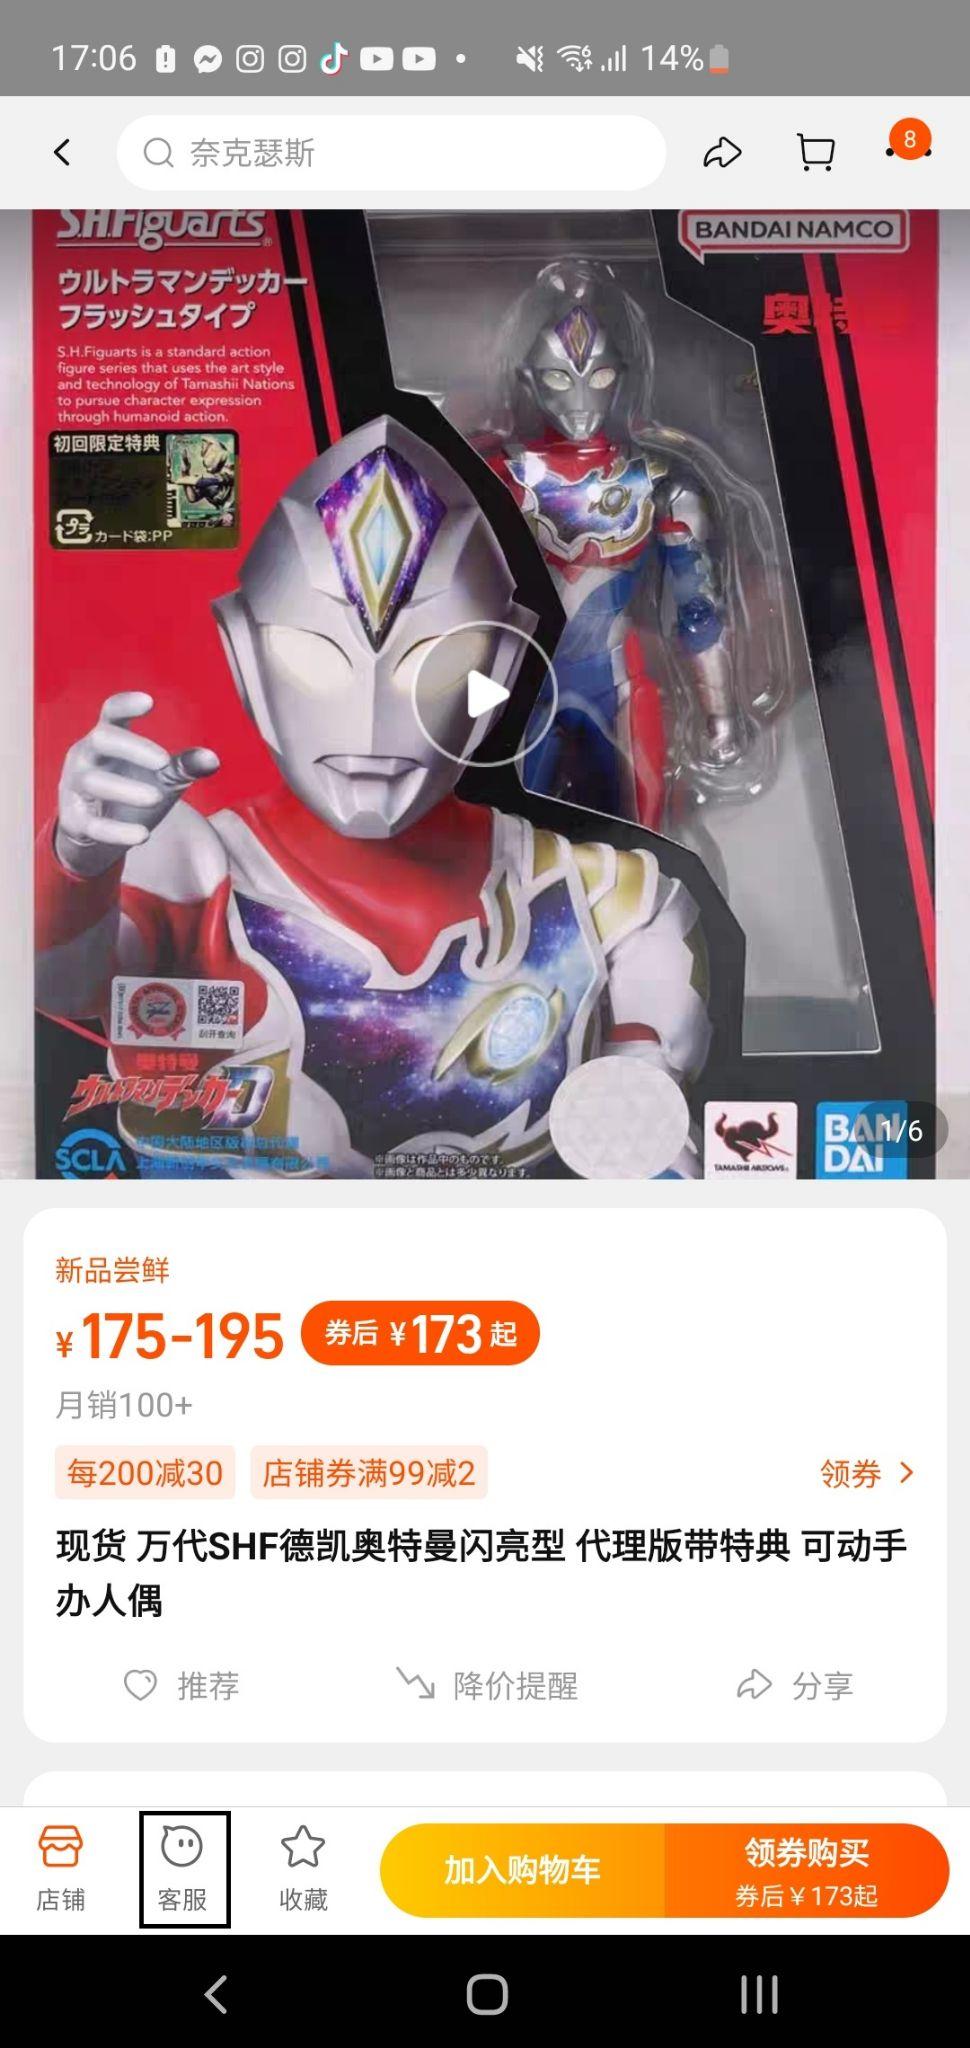 Chat the seller when viewing the product on mobile to chat with seller on Taobao